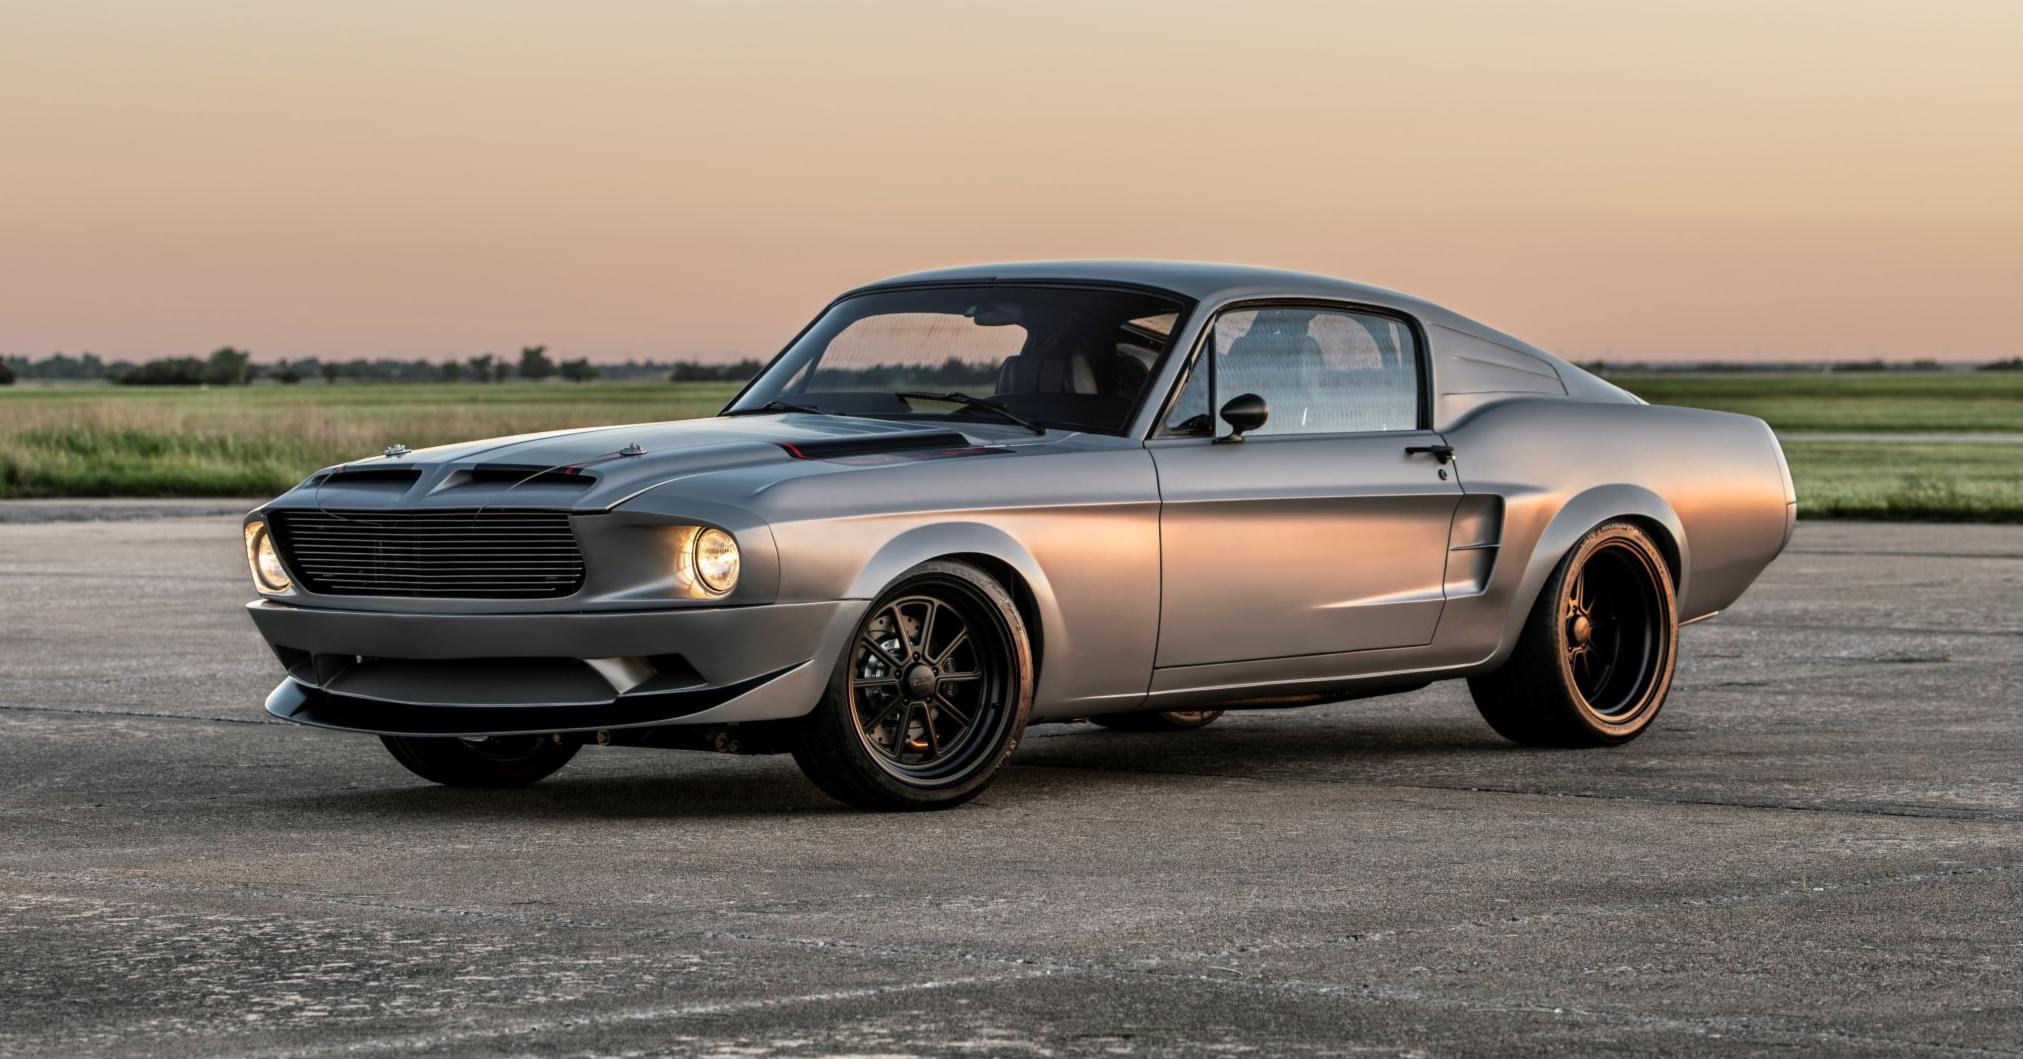 The Supercharged Ford Mustang Is a 770 Custom Stunner - Maxim